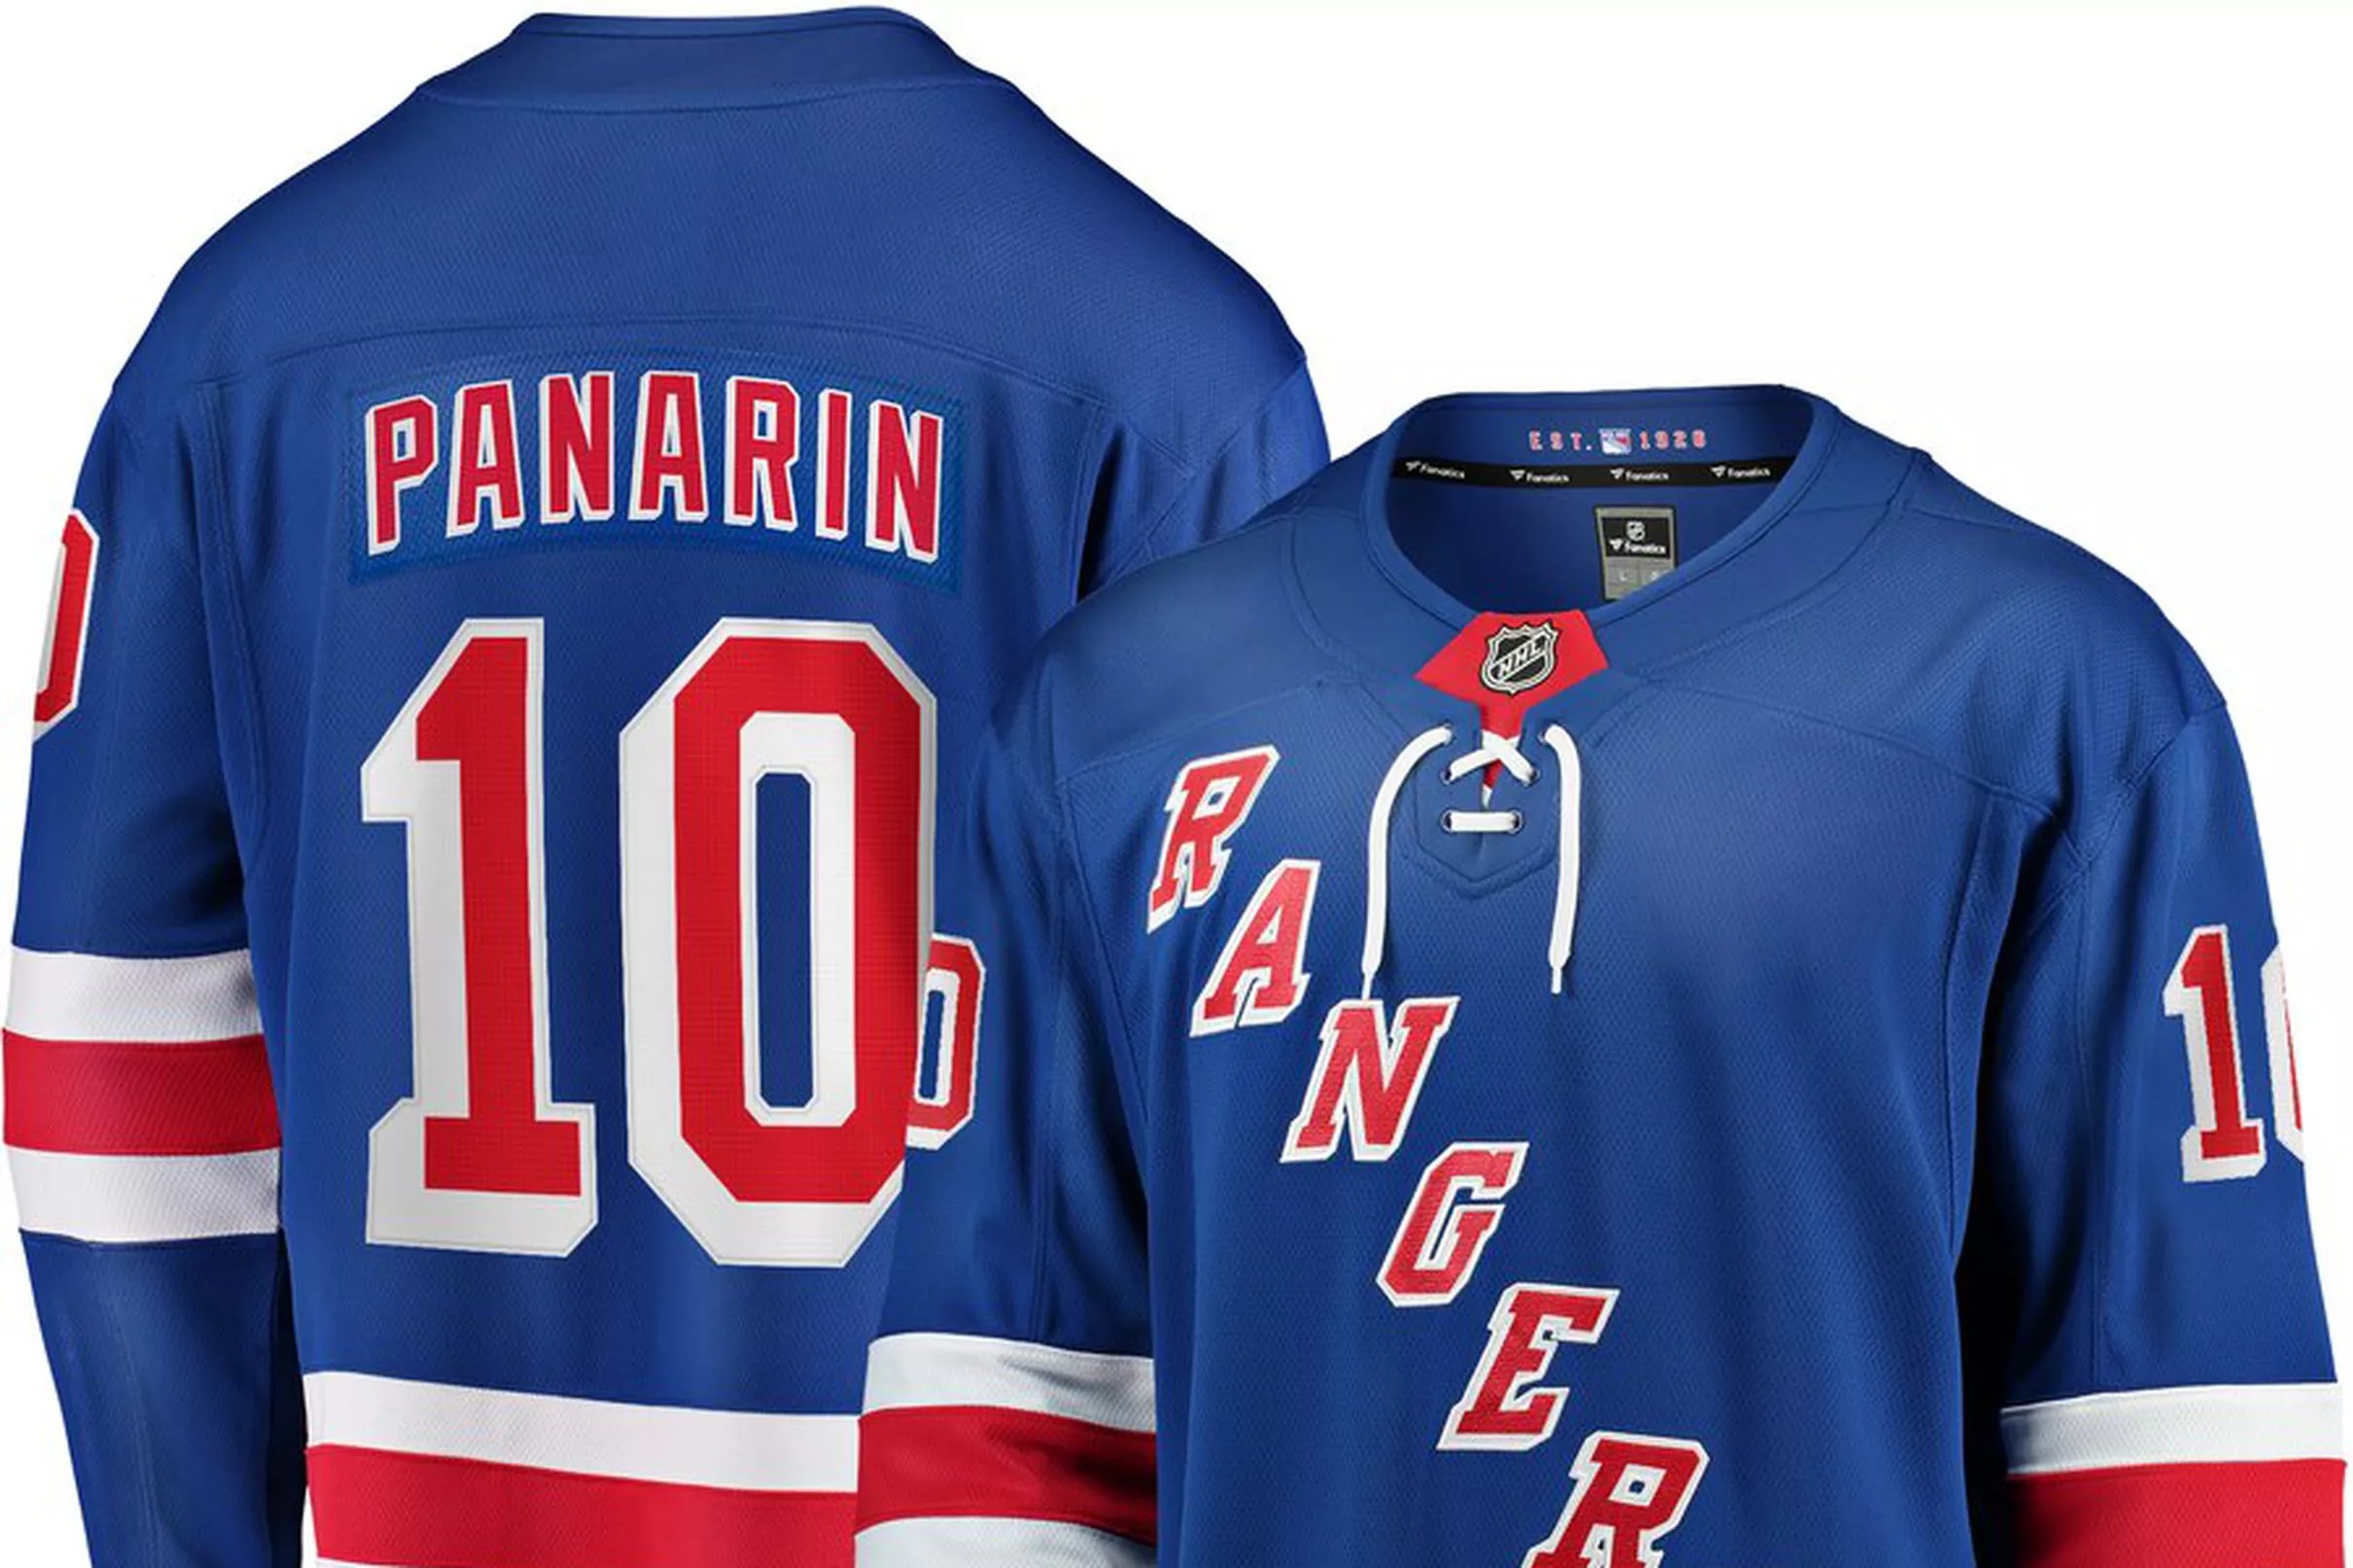 The Artemi Panarin Rangers era officially begins with his new jersey!